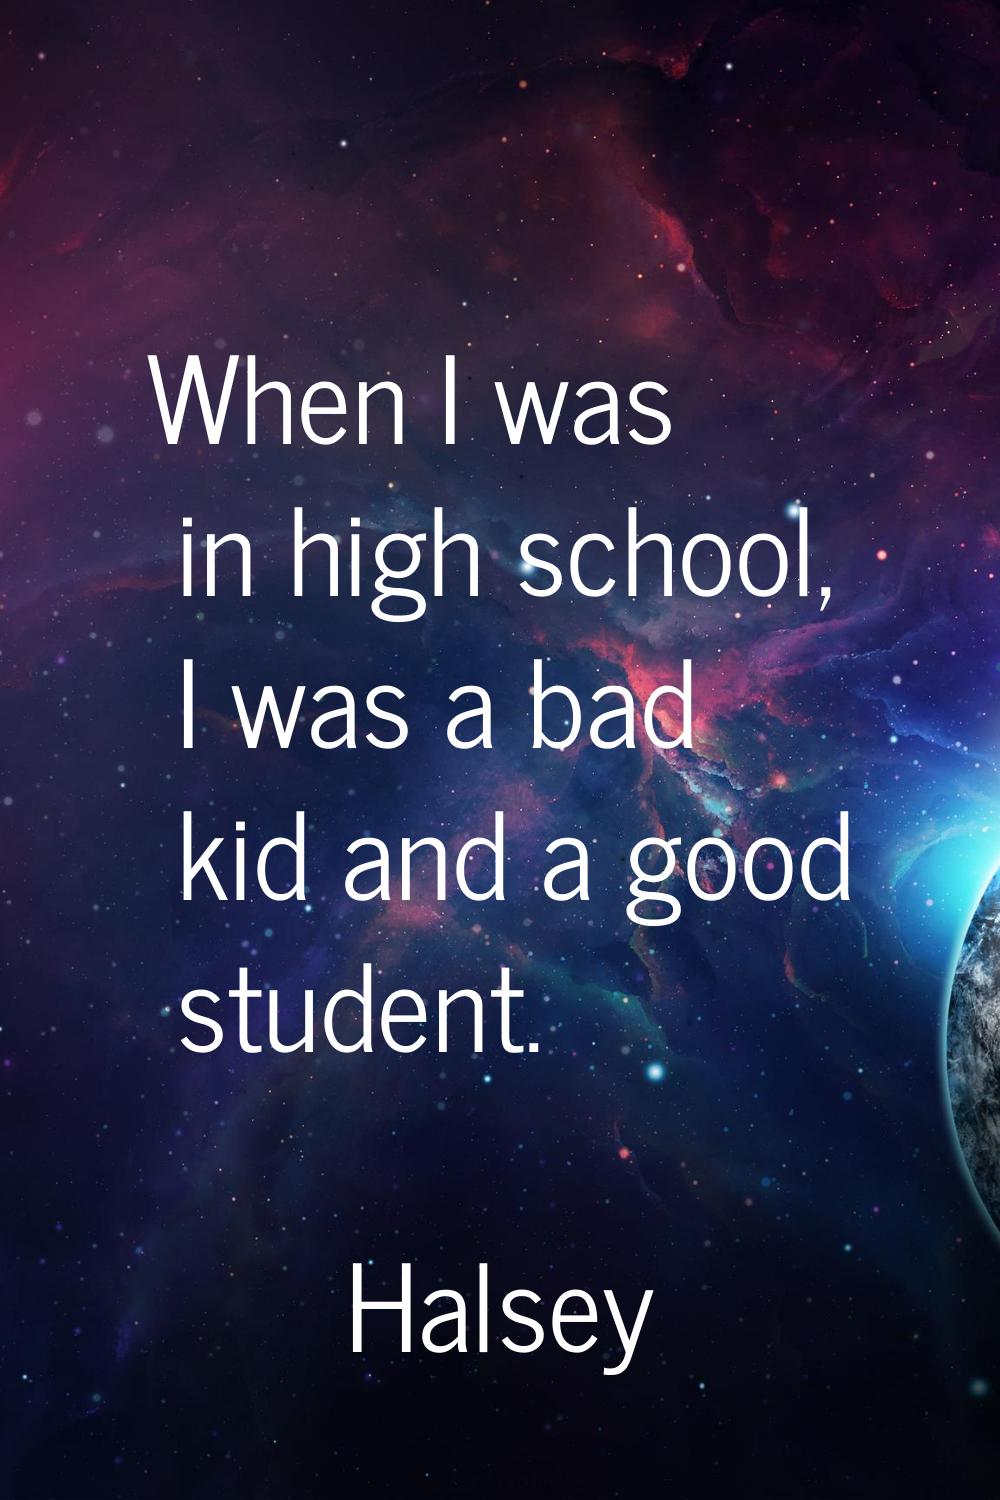 When I was in high school, I was a bad kid and a good student.